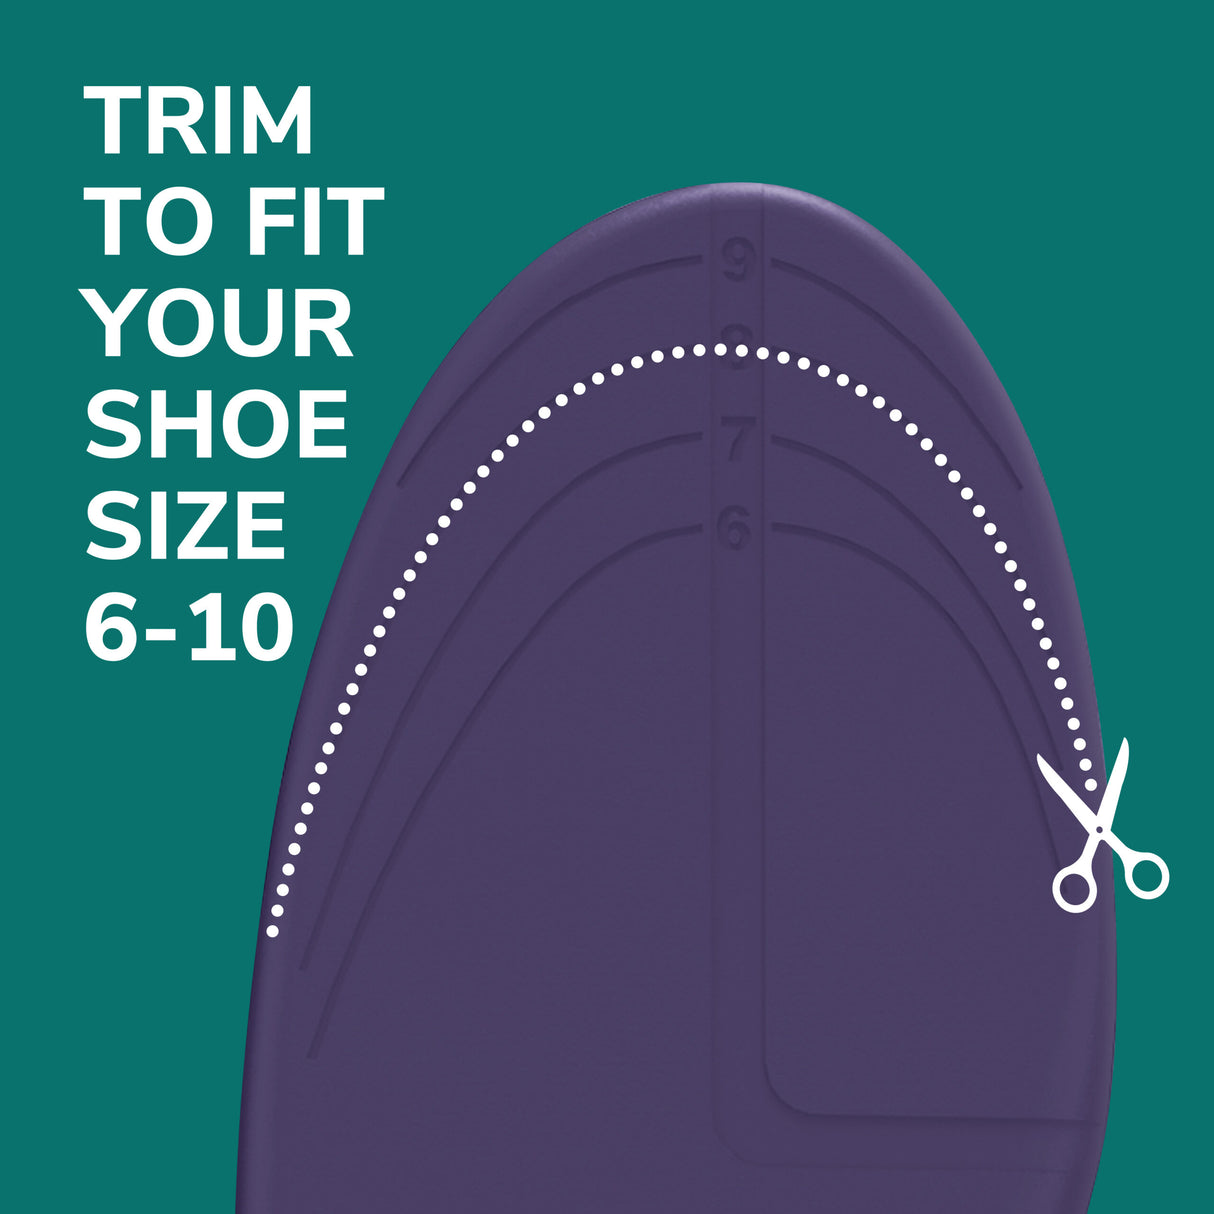 image of trimmed to fit shoe size 6-10